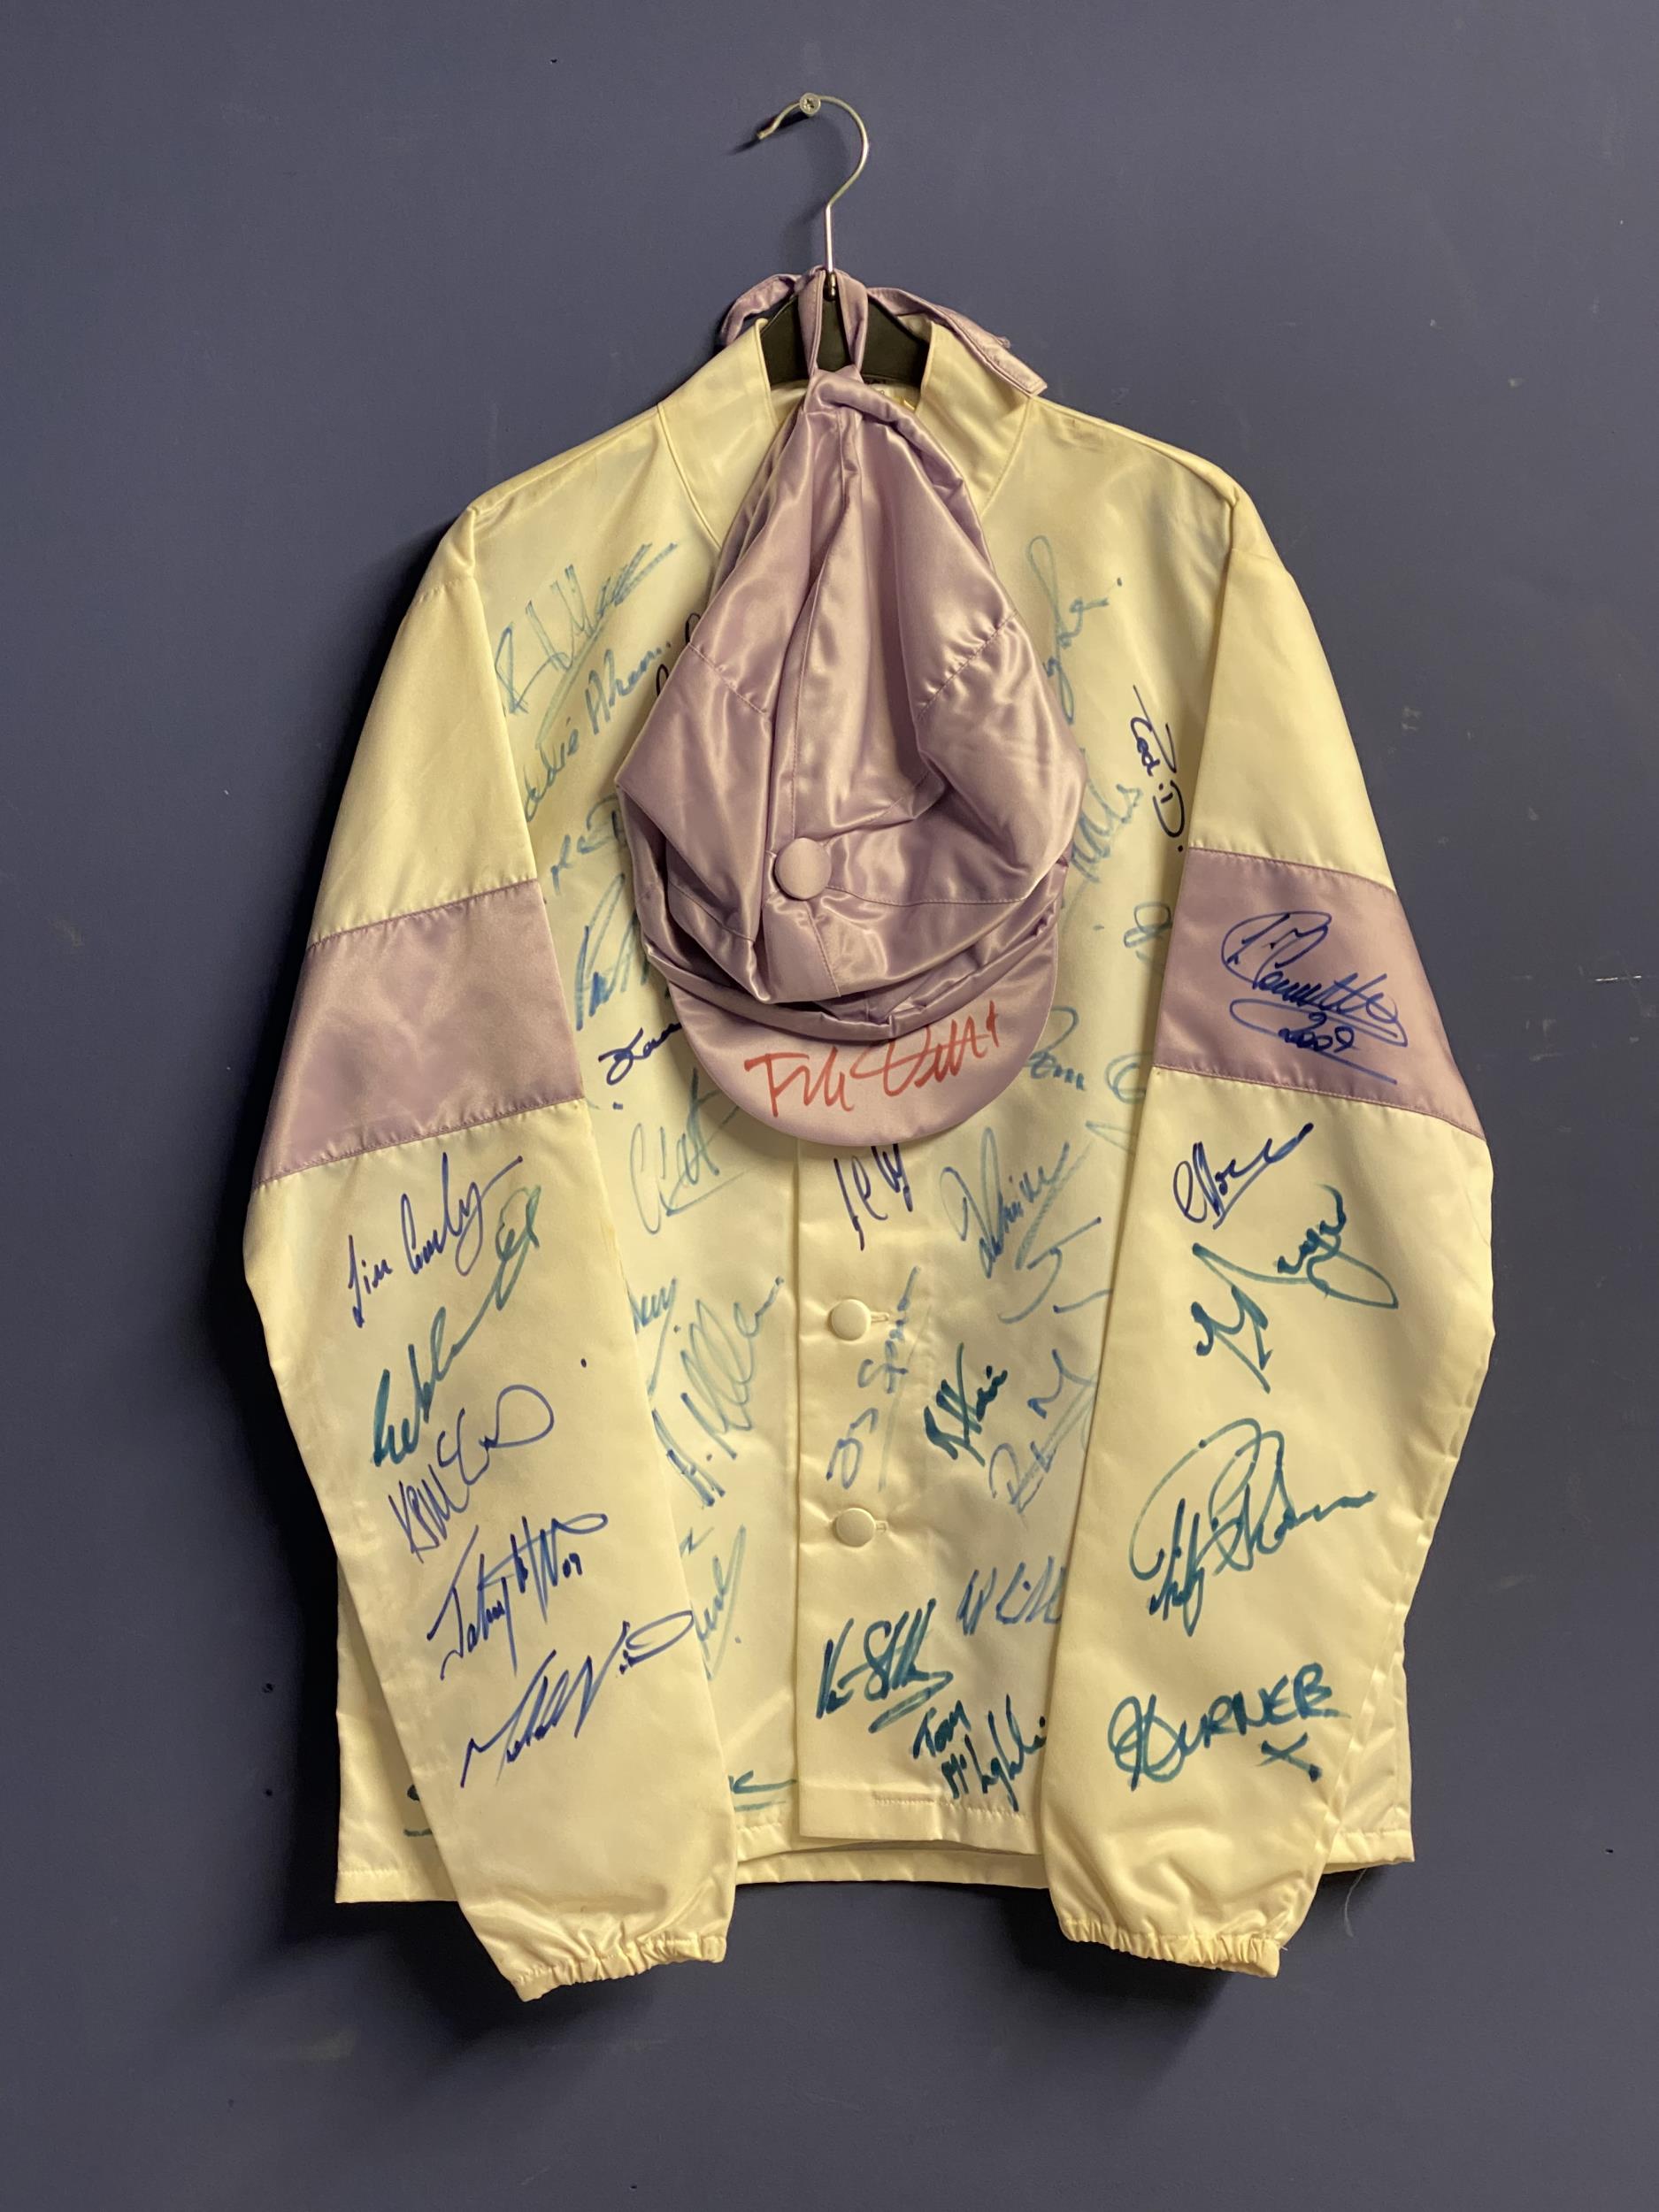 Jockeys silks, autographed by flat jockeys, with Authenticity Card showing all signatures etc -